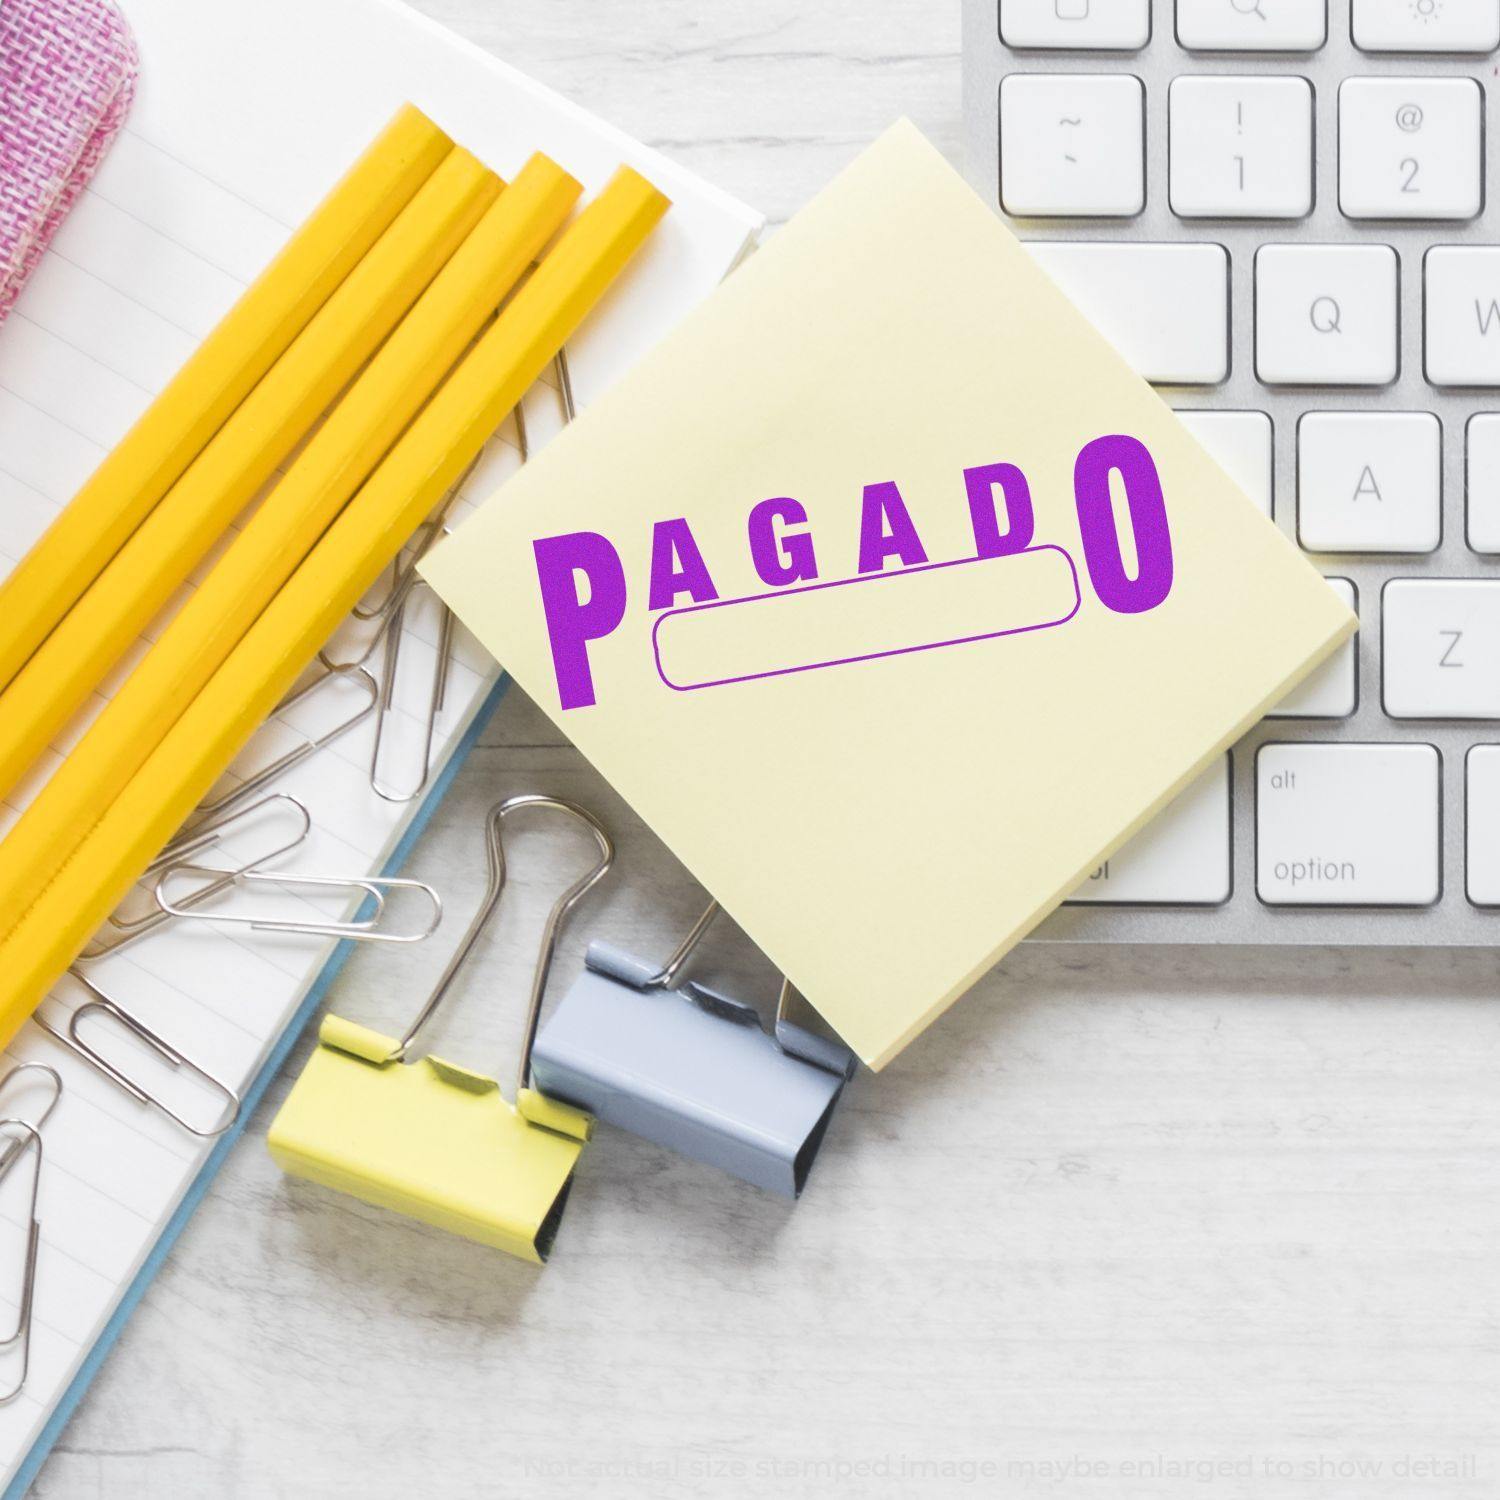 A stock office rubber stamp with a stamped image showing how the text "PAGADO" in a large font with a box is displayed after stamping.